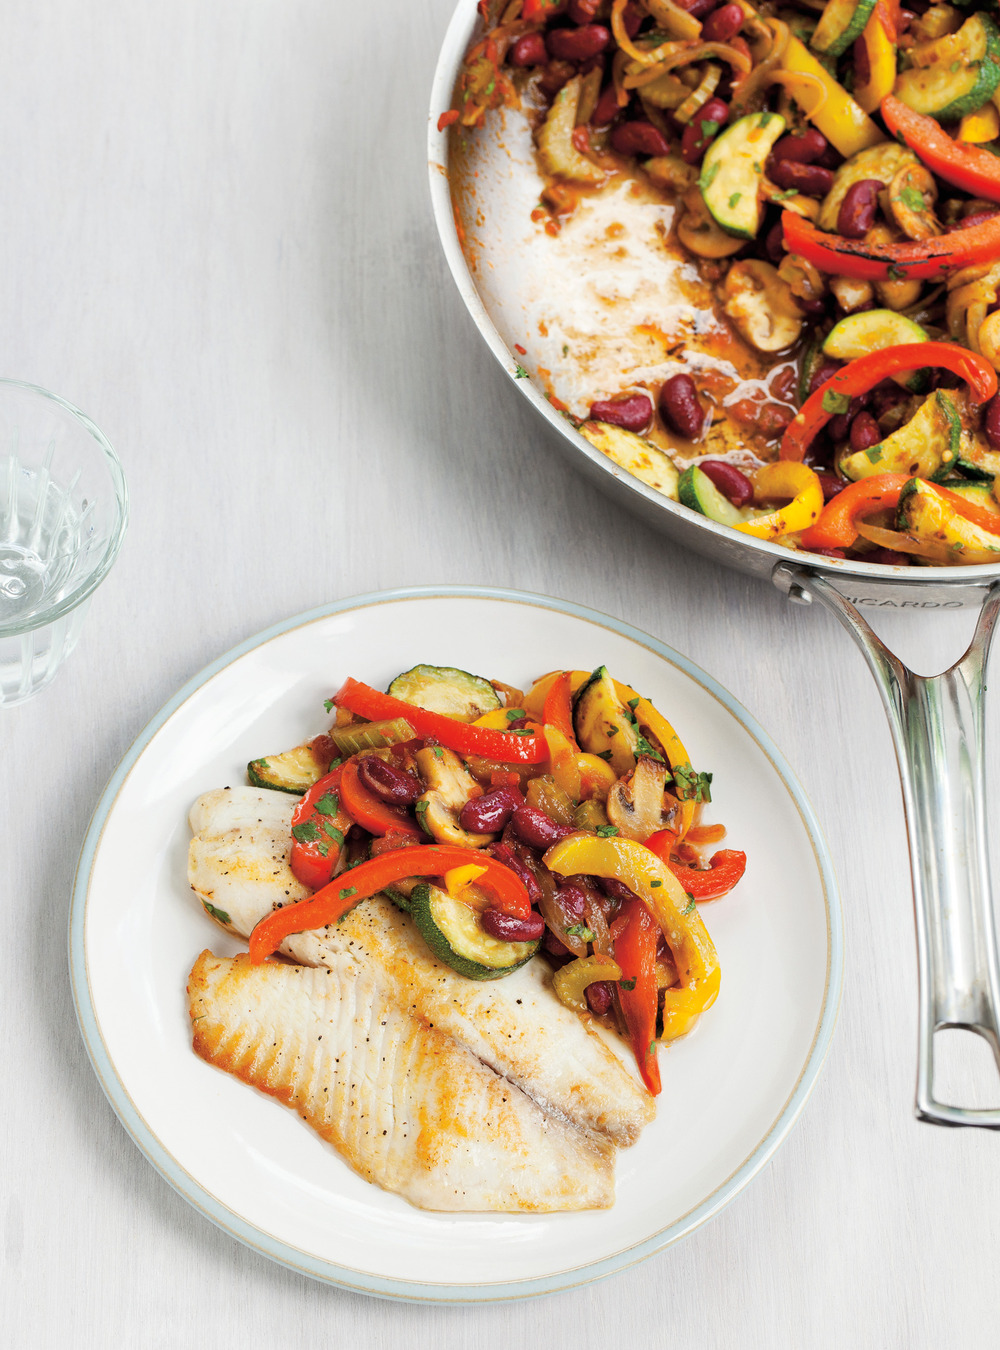 Seared Tilapia and Vegetable Stir-Fry